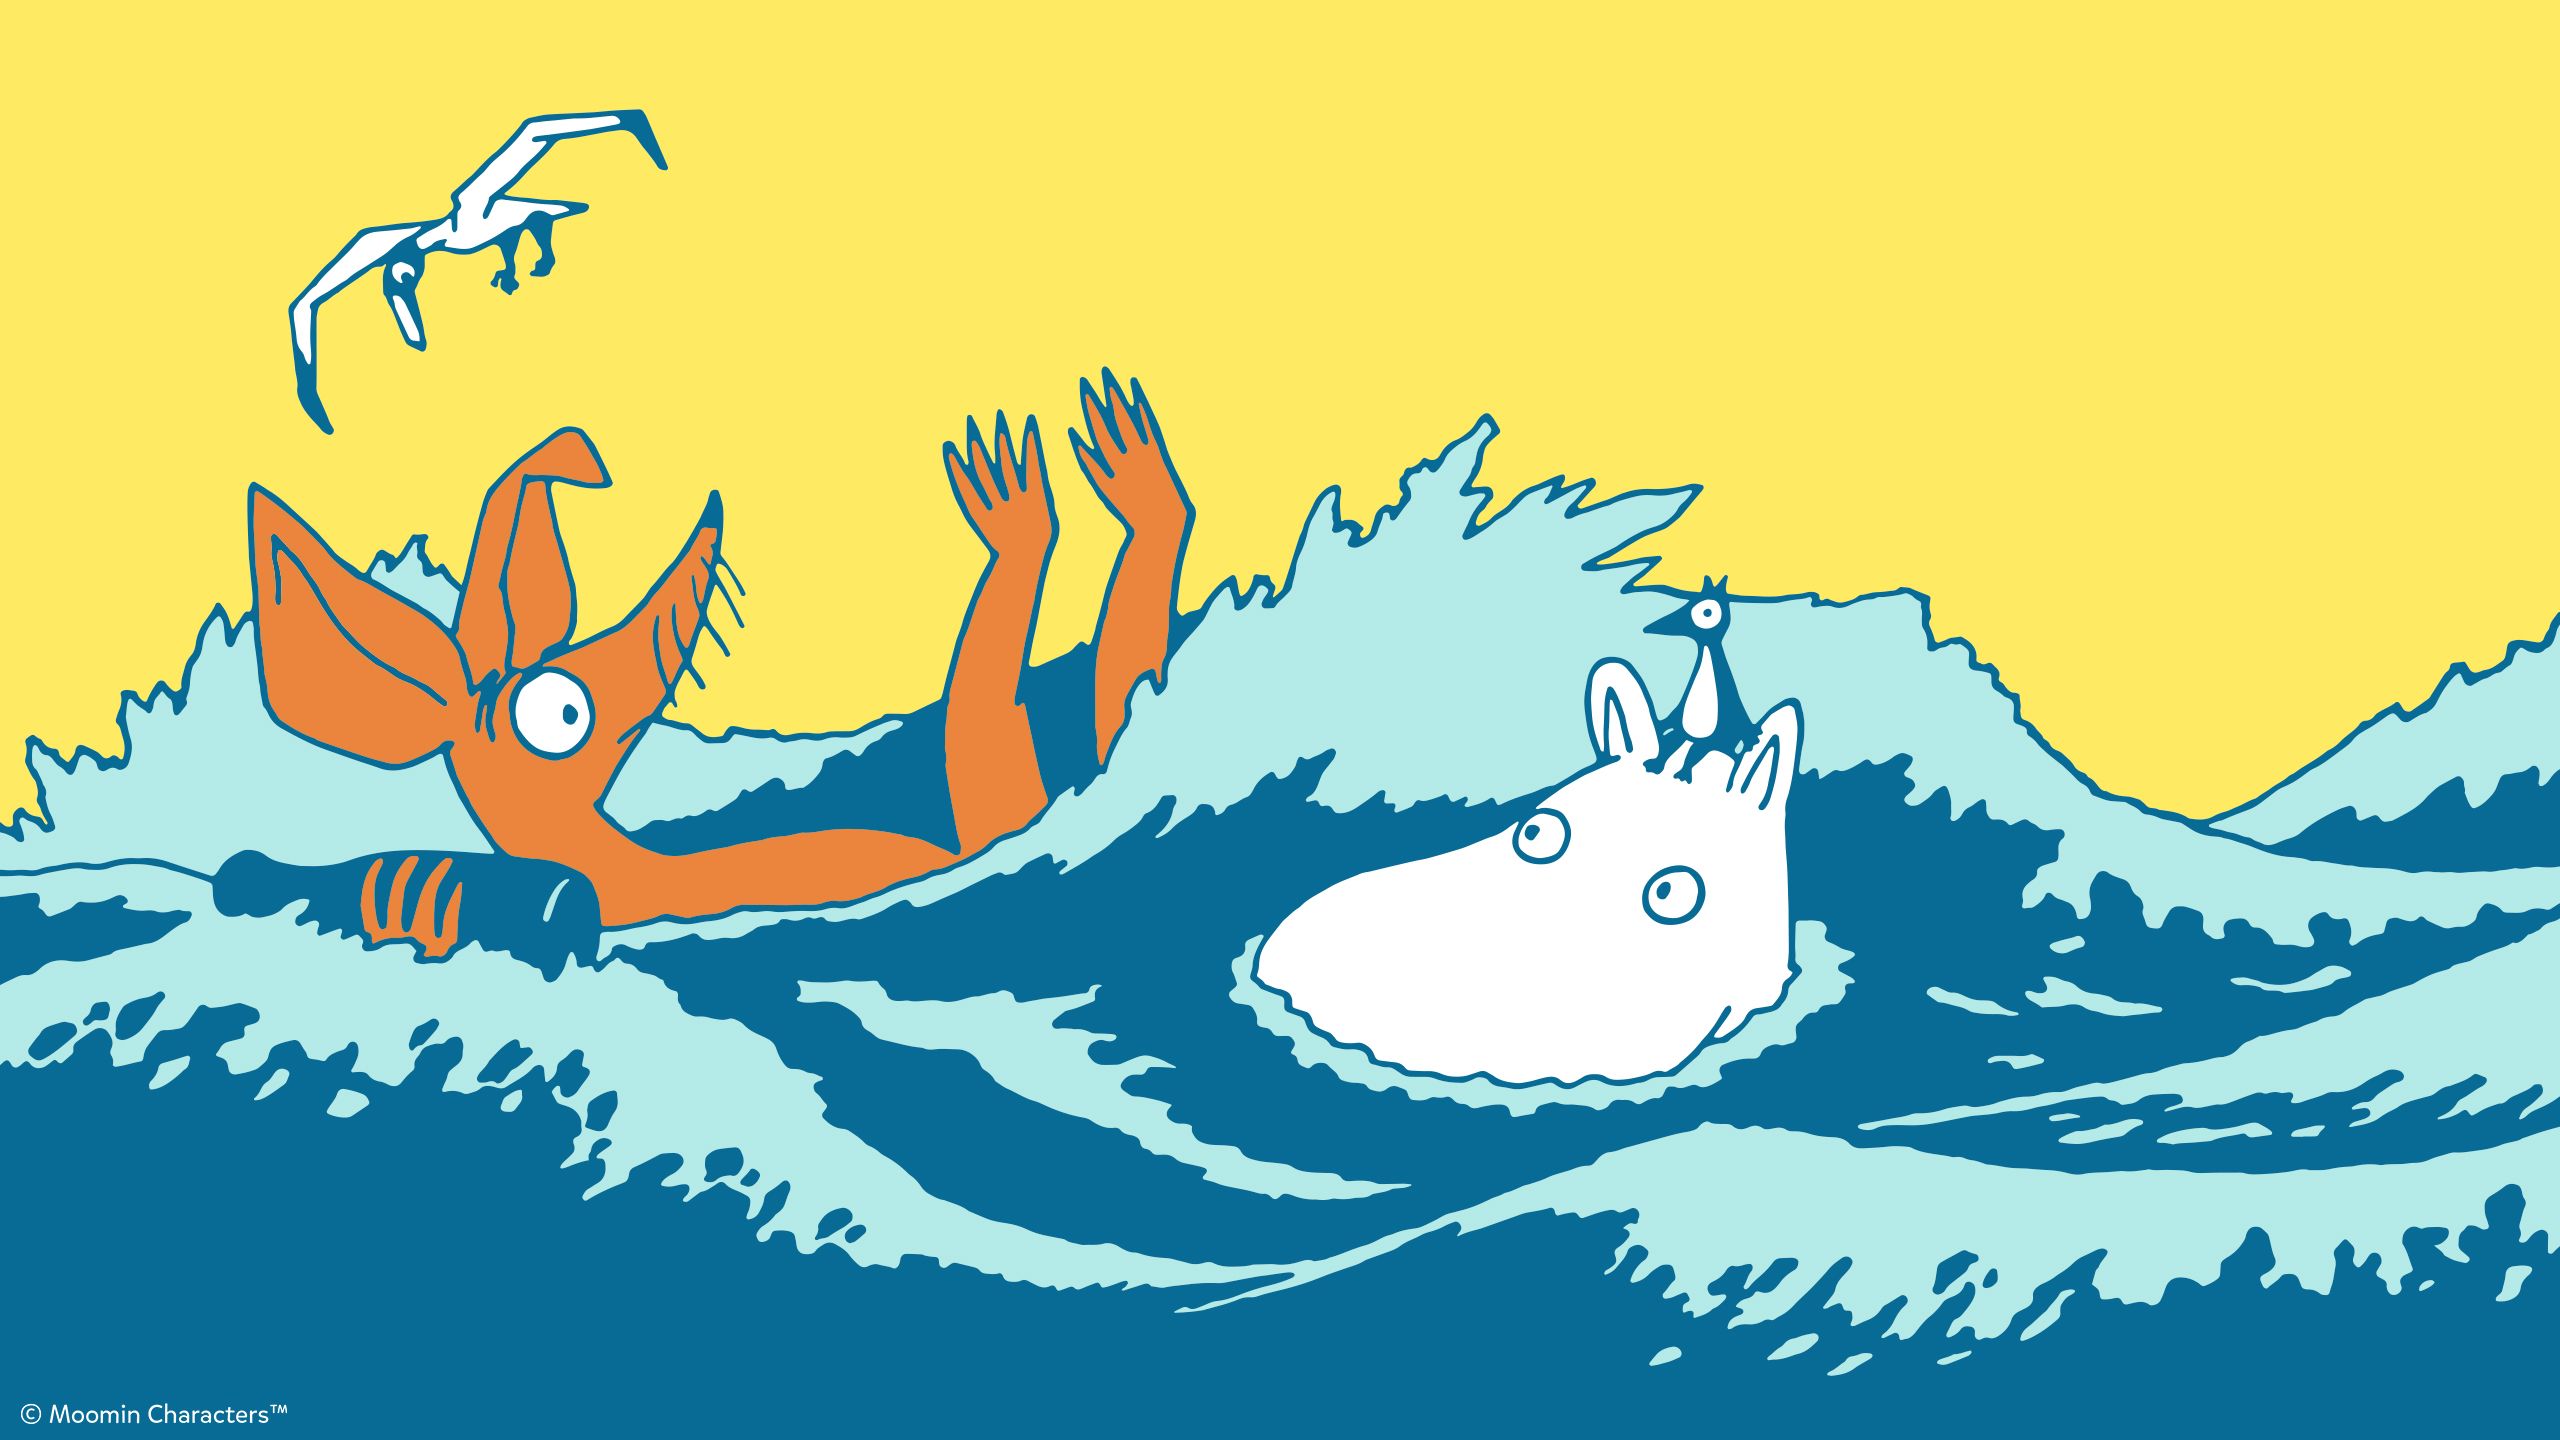 Show your support for #OURSEA with free Moomin wallpaper